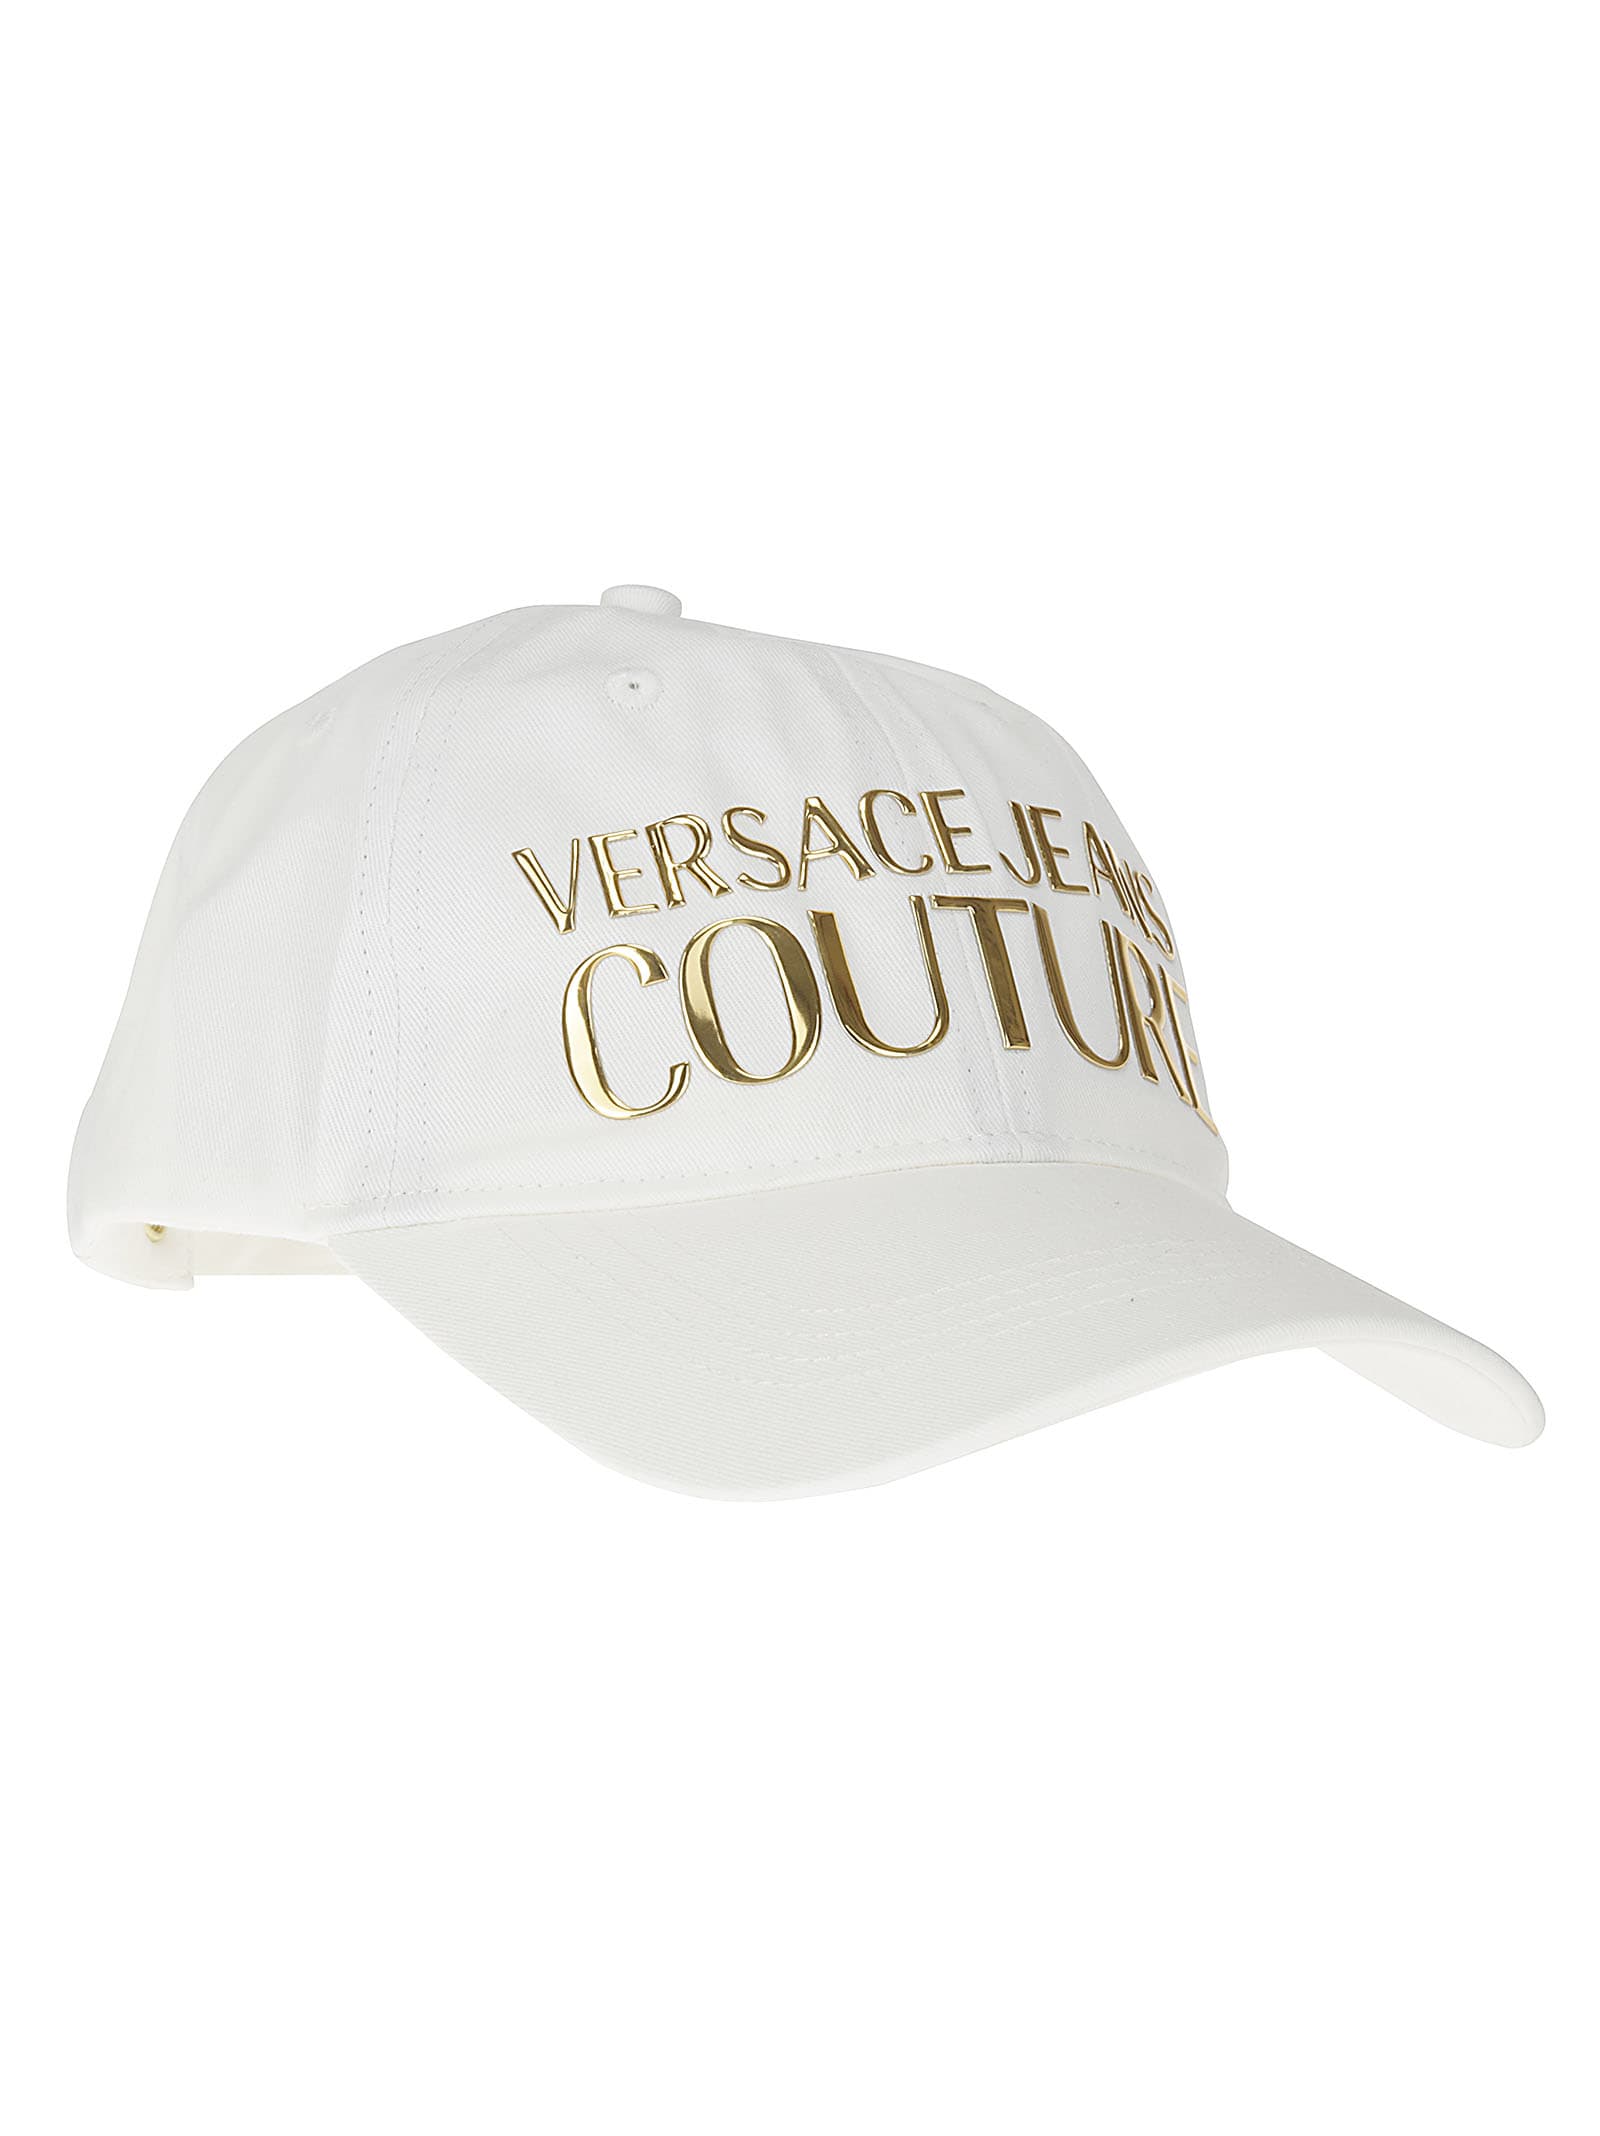 Versace Jeans Couture Baseball Cap With Cut In The Middle Hat In White/gold